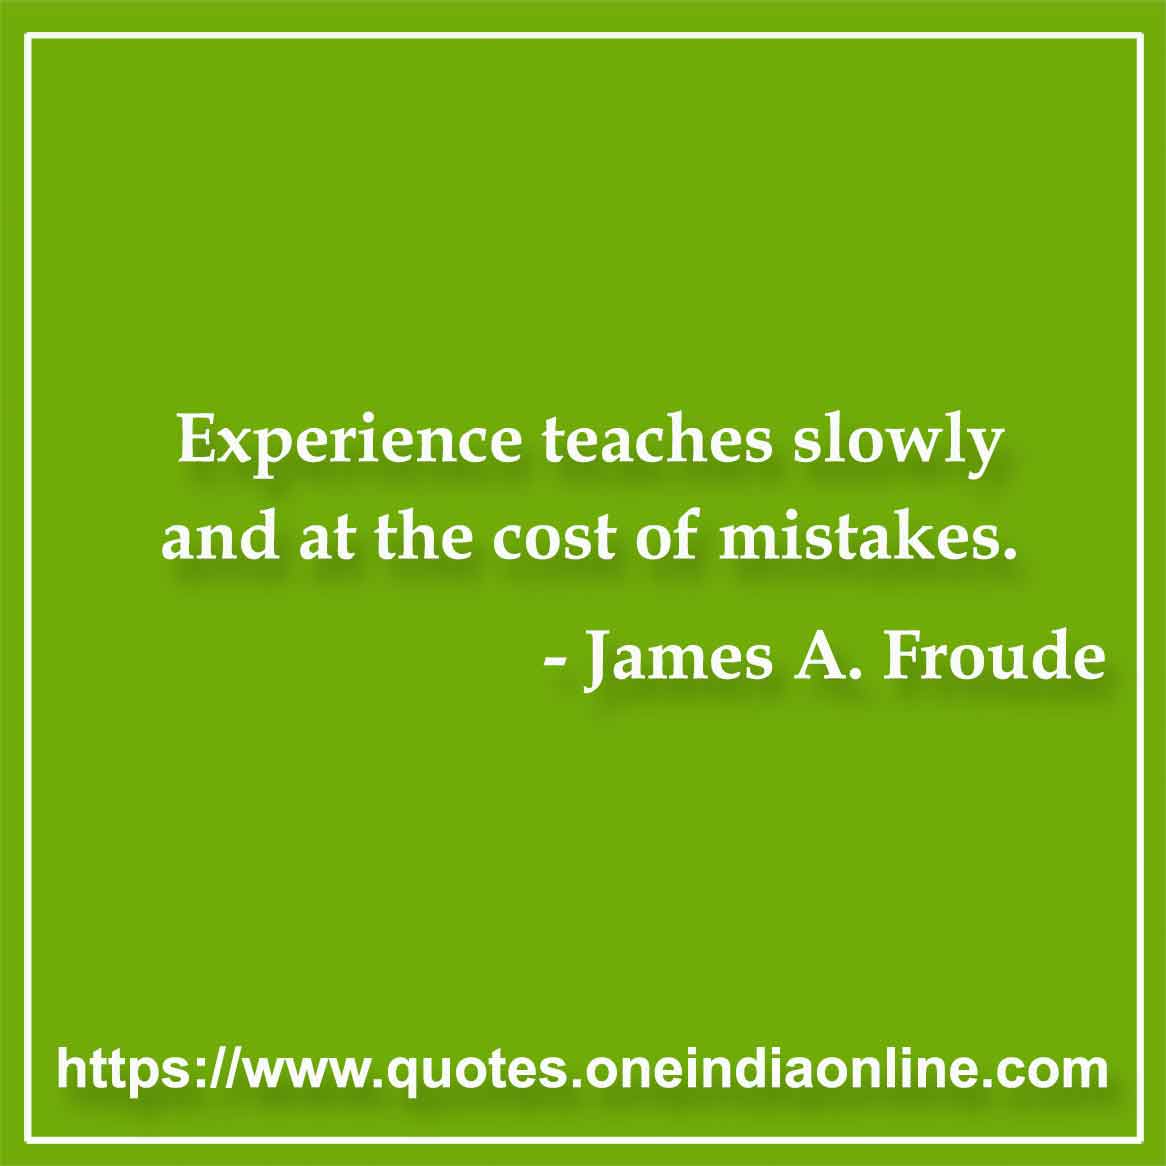 Experience teaches slowly and at the cost of mistakes.

- Mistake Quotes by James A. Froude